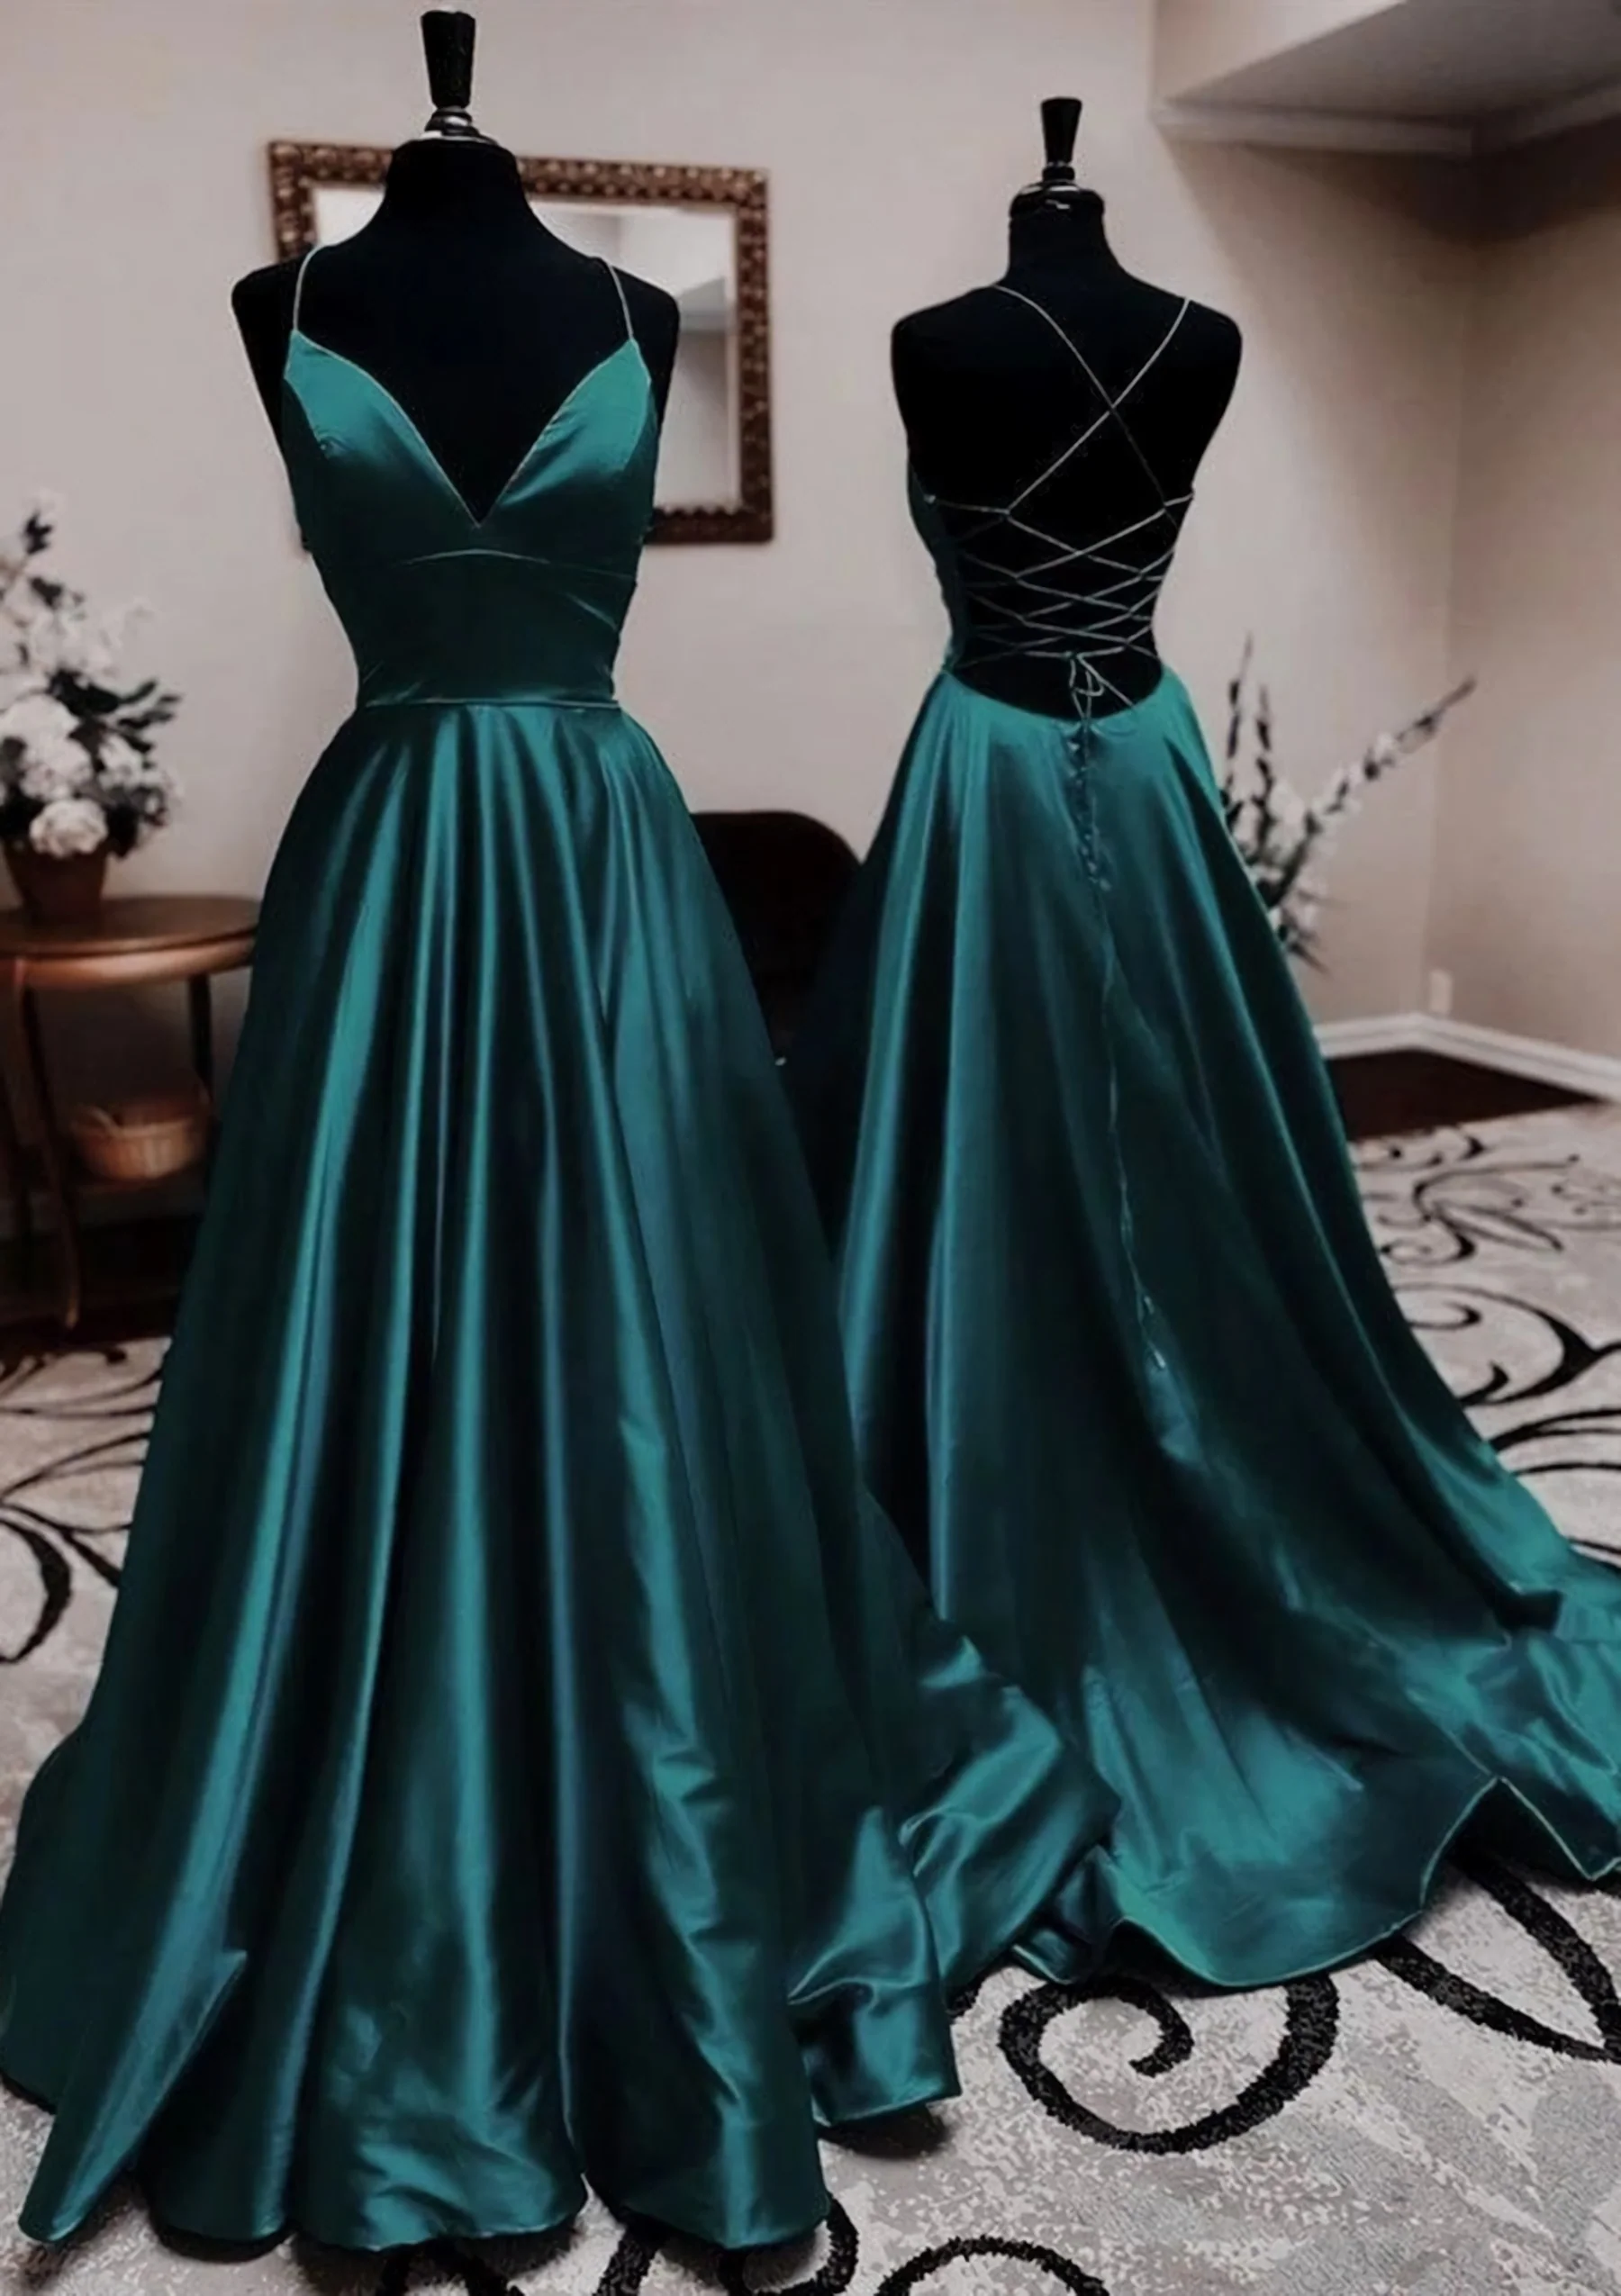 Fancy Dress, Sexy A Line Dark Green Satin Backless Prom Dresses 21th Birthday Outfit